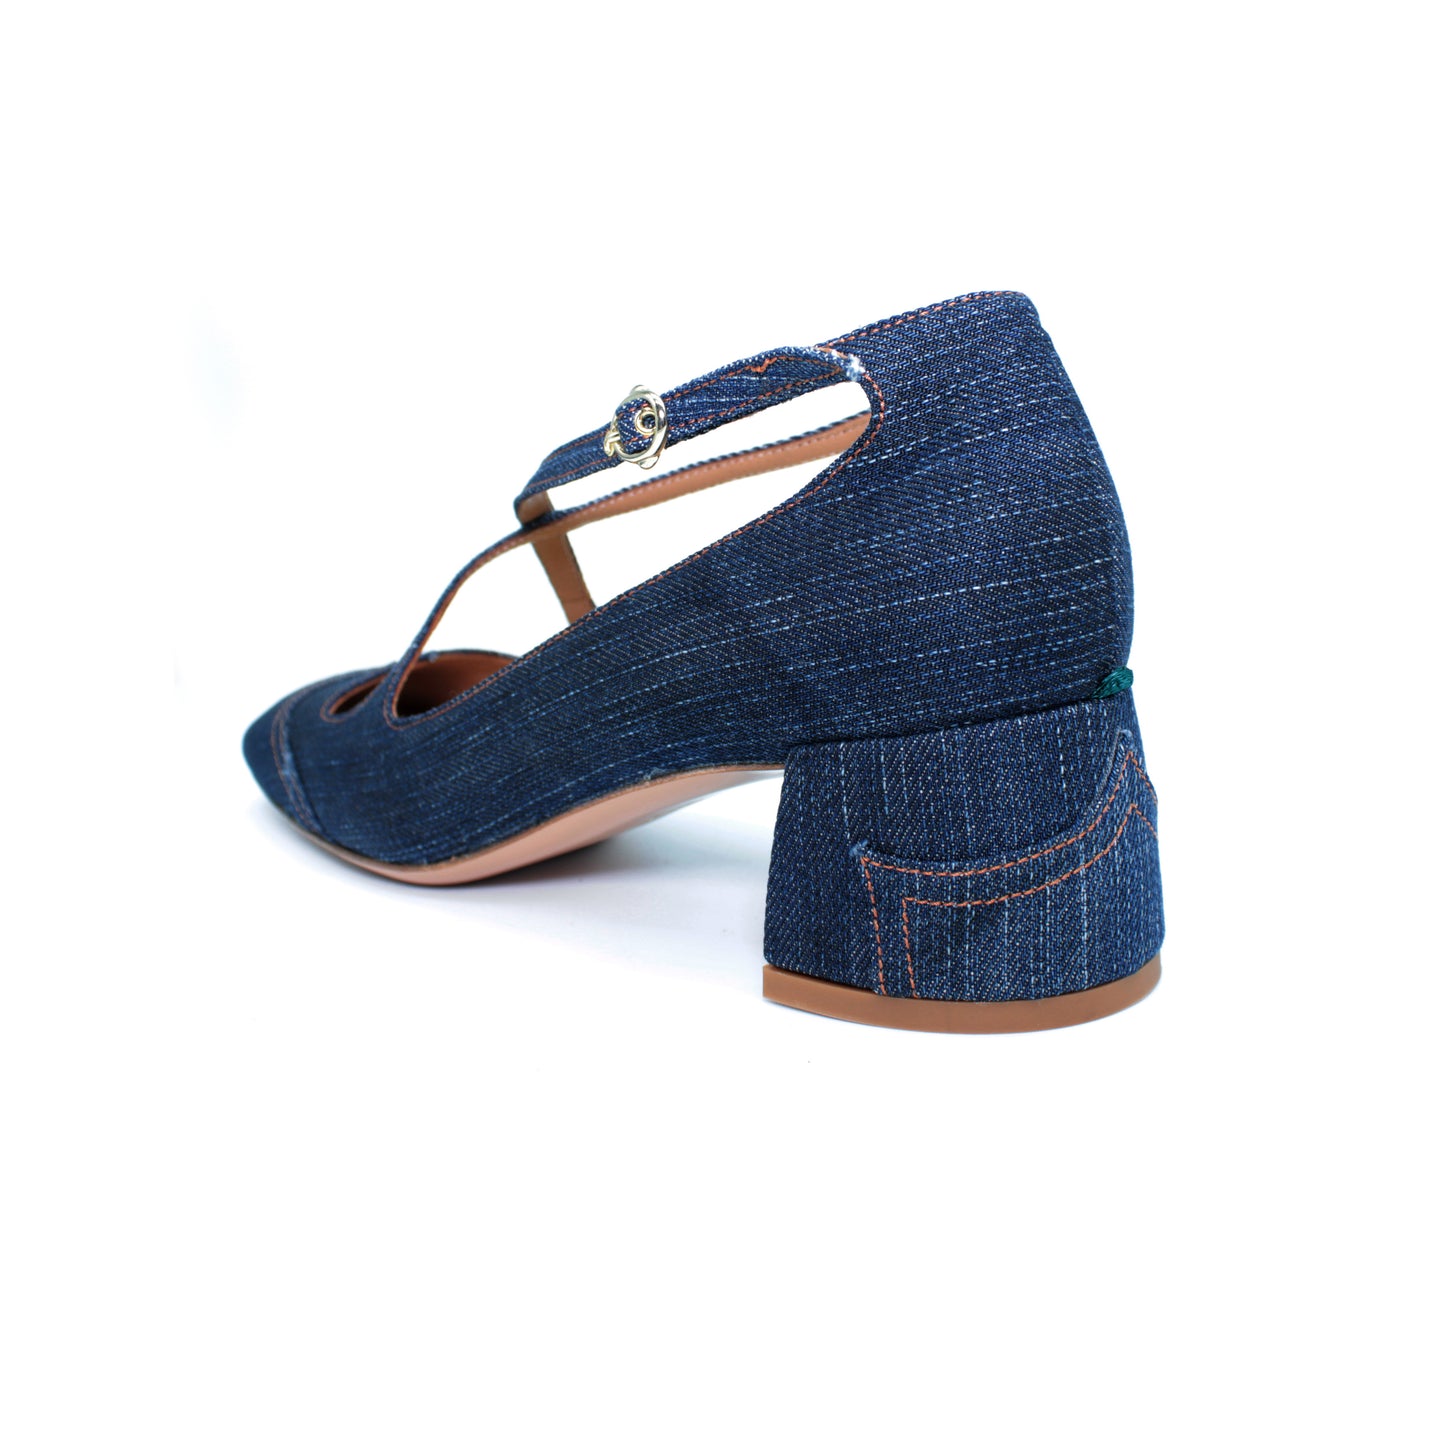 Pump Two for Love in recycled denim 06 - EXCLUSIVE ONLINE